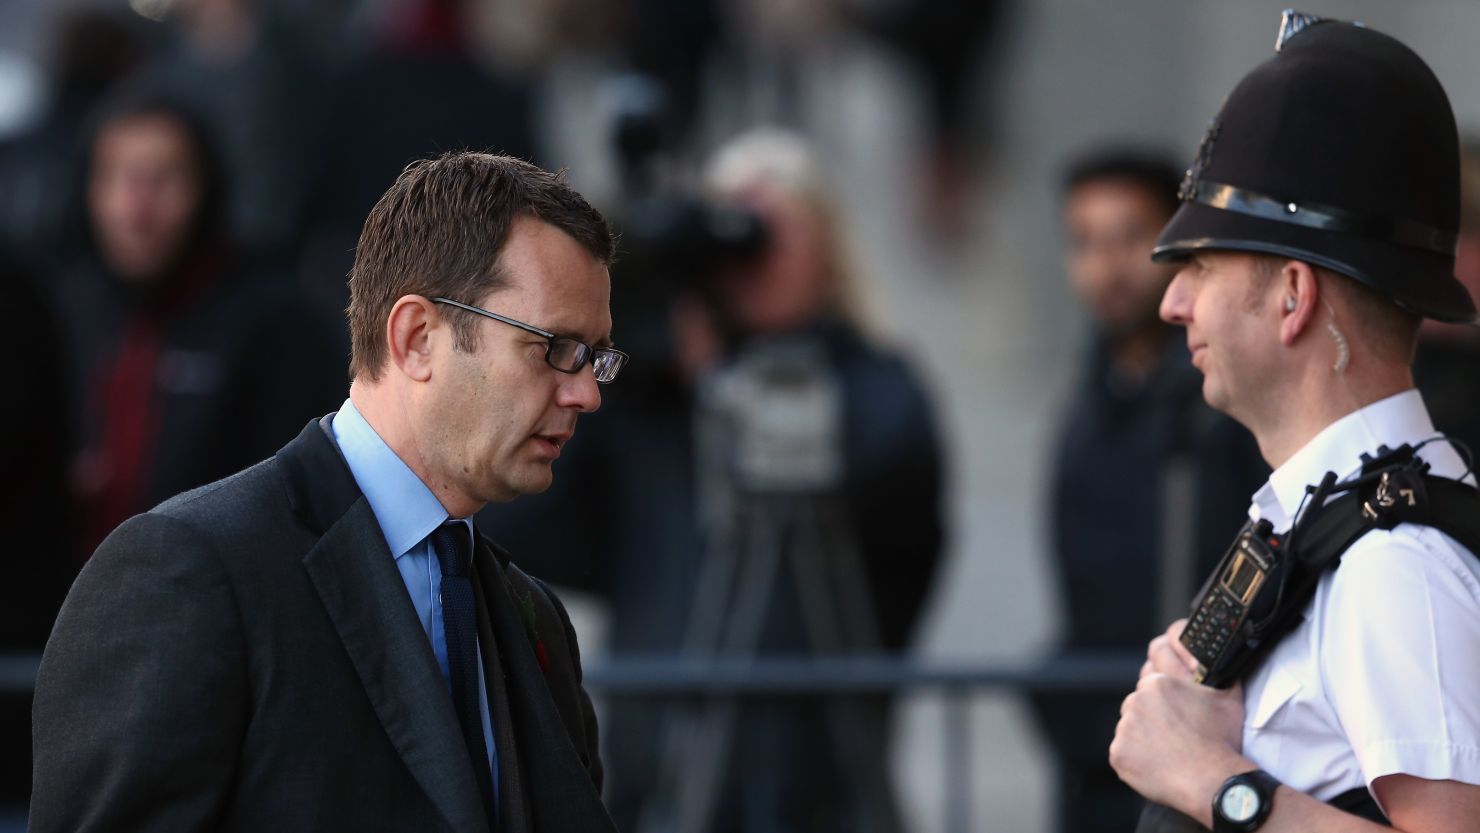 Former News of the World editor Andy Coulson arrives at the Old Bailey on Wednesday in London.